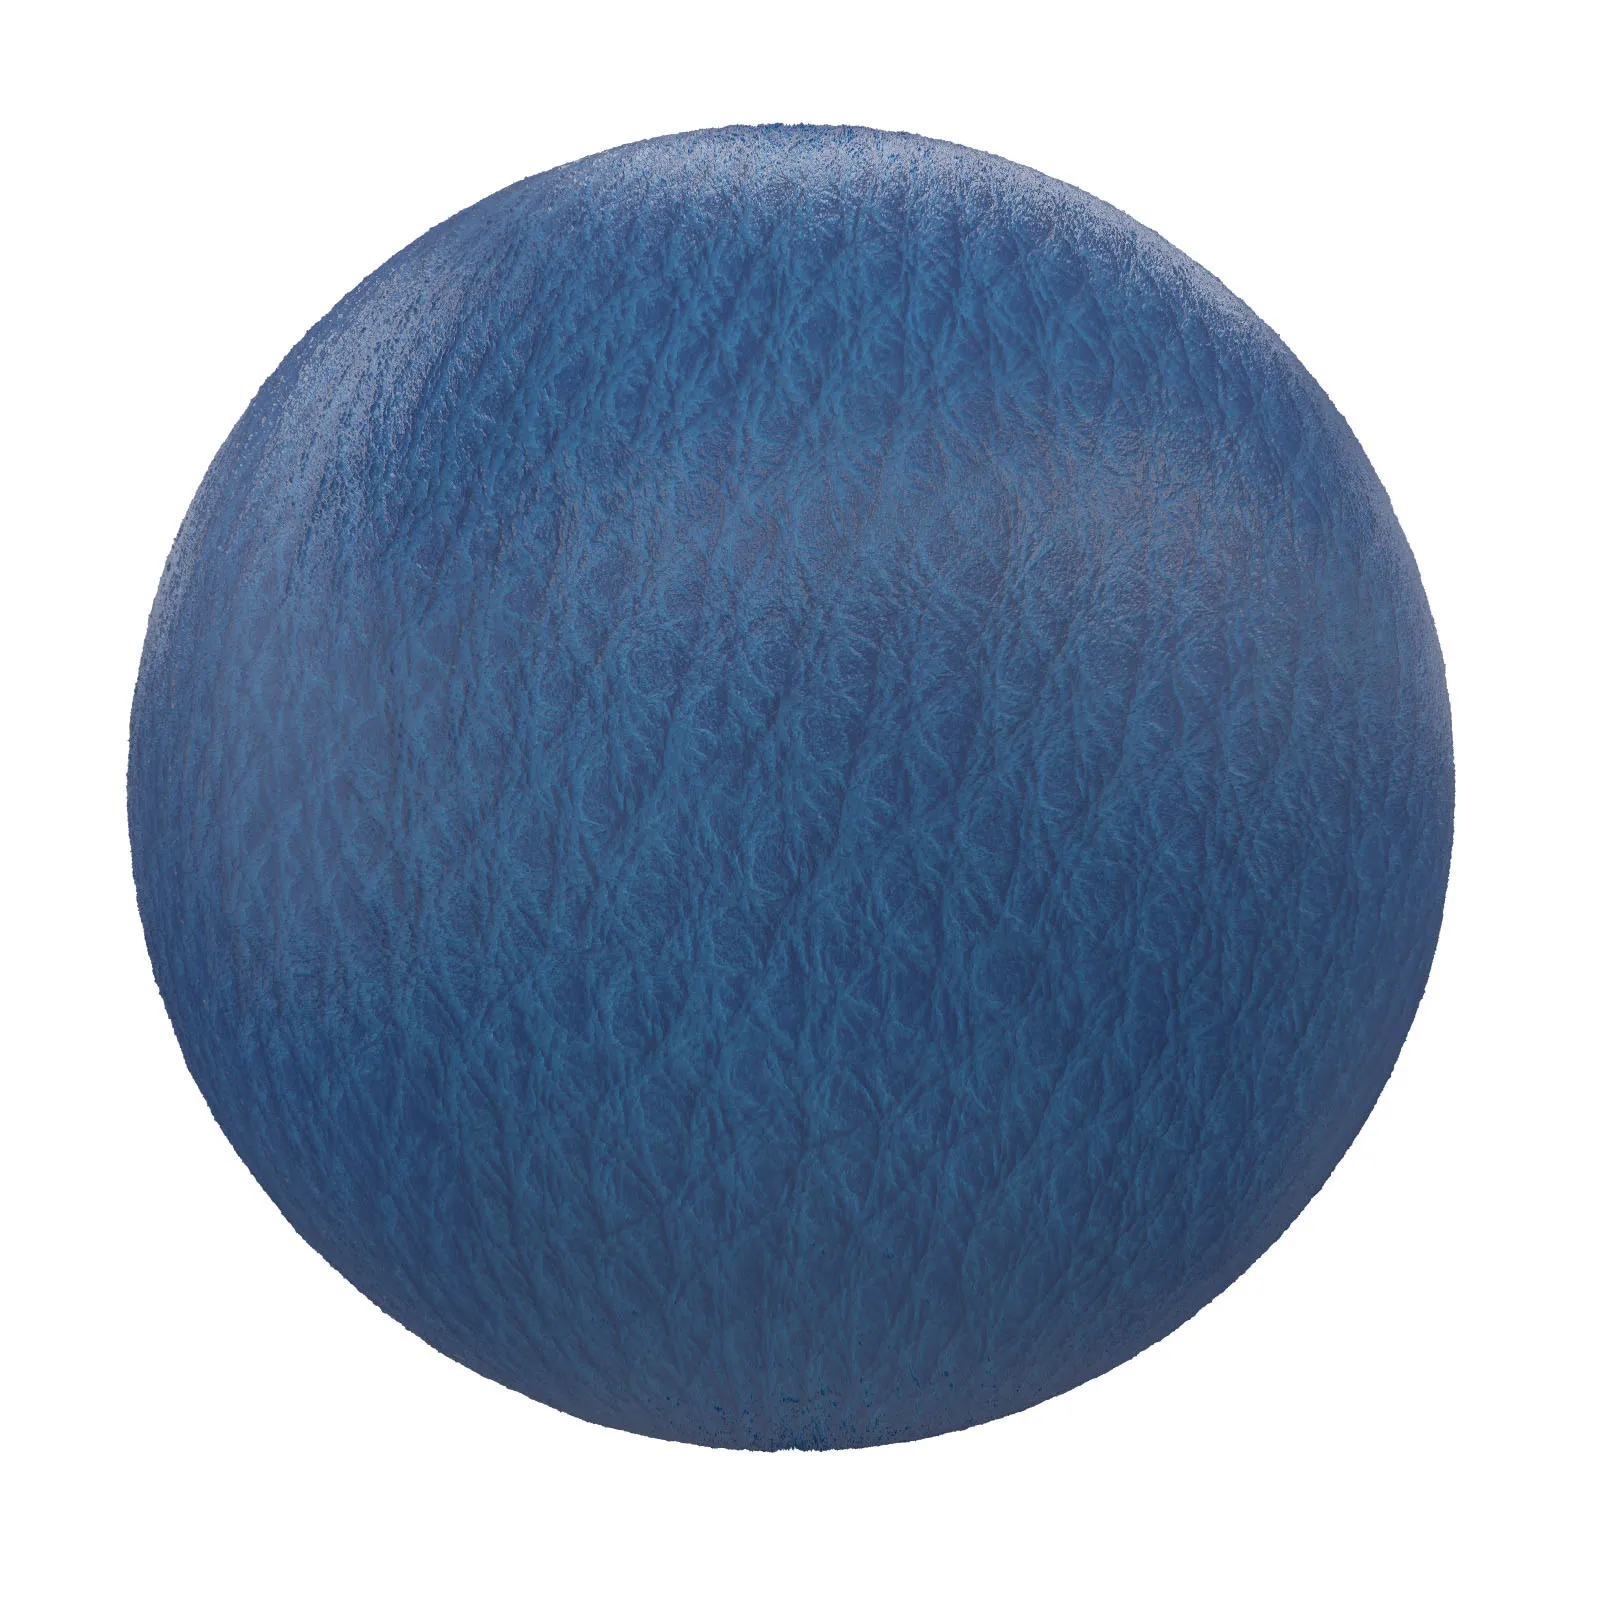 PBR CGAXIS TEXTURES – LEATHER – Blue Leather 5